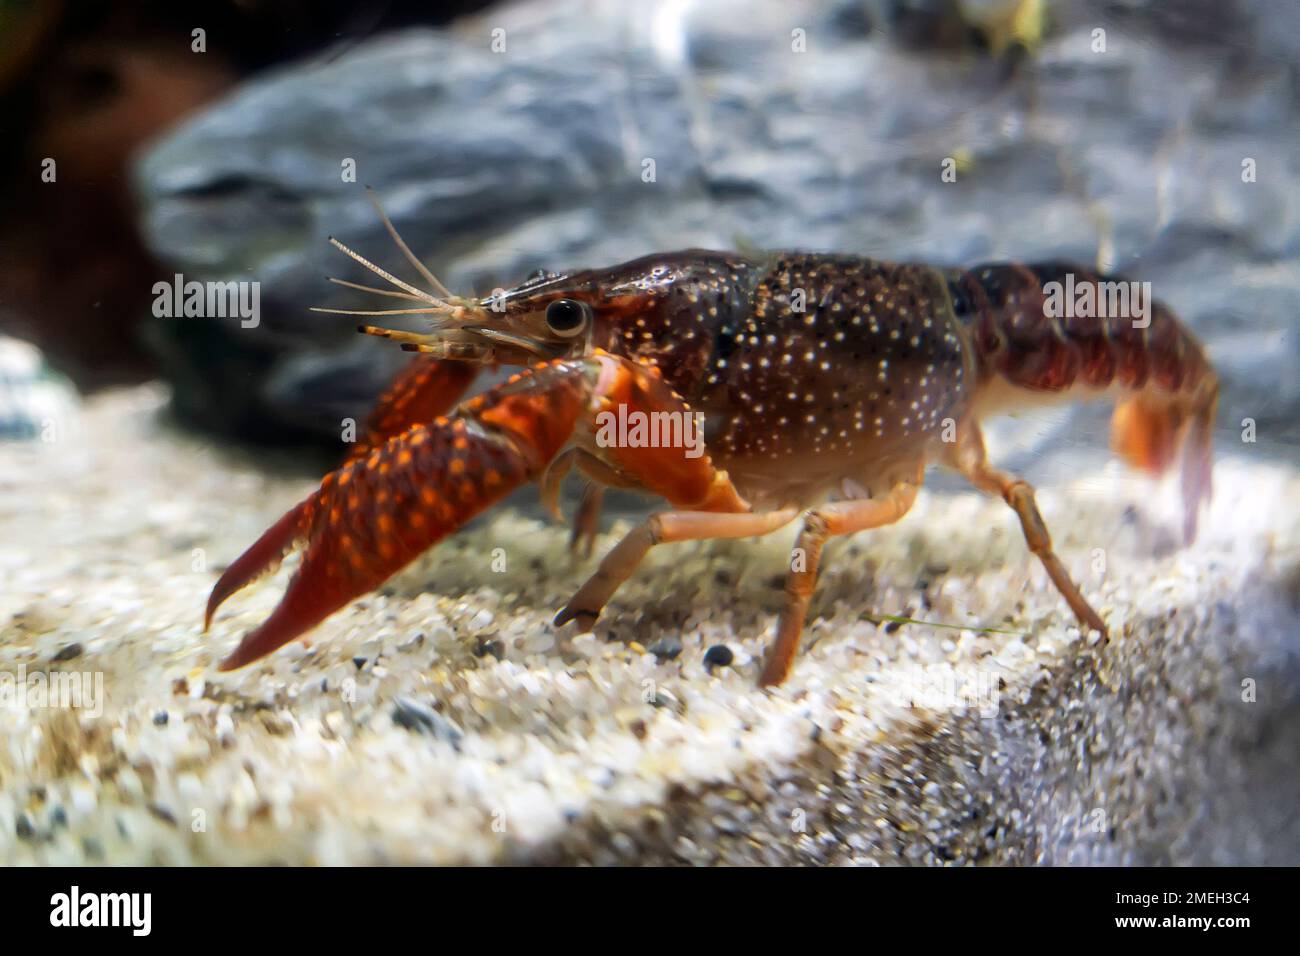 Crayfish guarding in aquarium glass fish tank oin water background. Single alive crayfish moves its claws and limbs in clear water background. Stock Photo